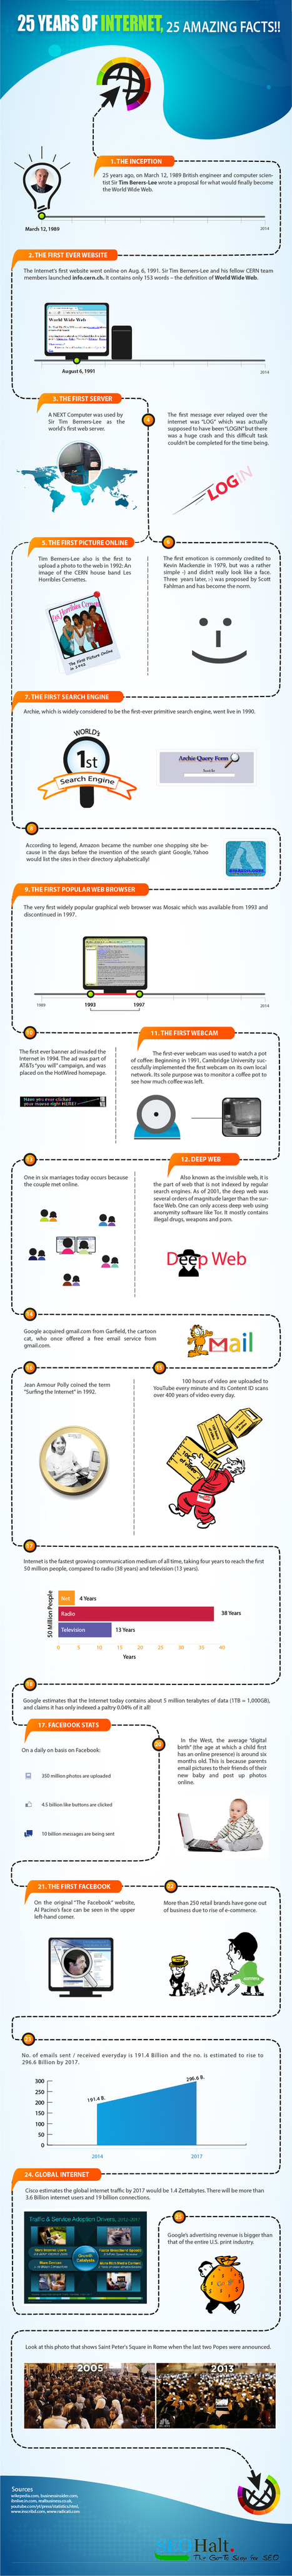 25 Amazing Facts about the Internet [Infographic] | Education 2.0 & 3.0 | Scoop.it